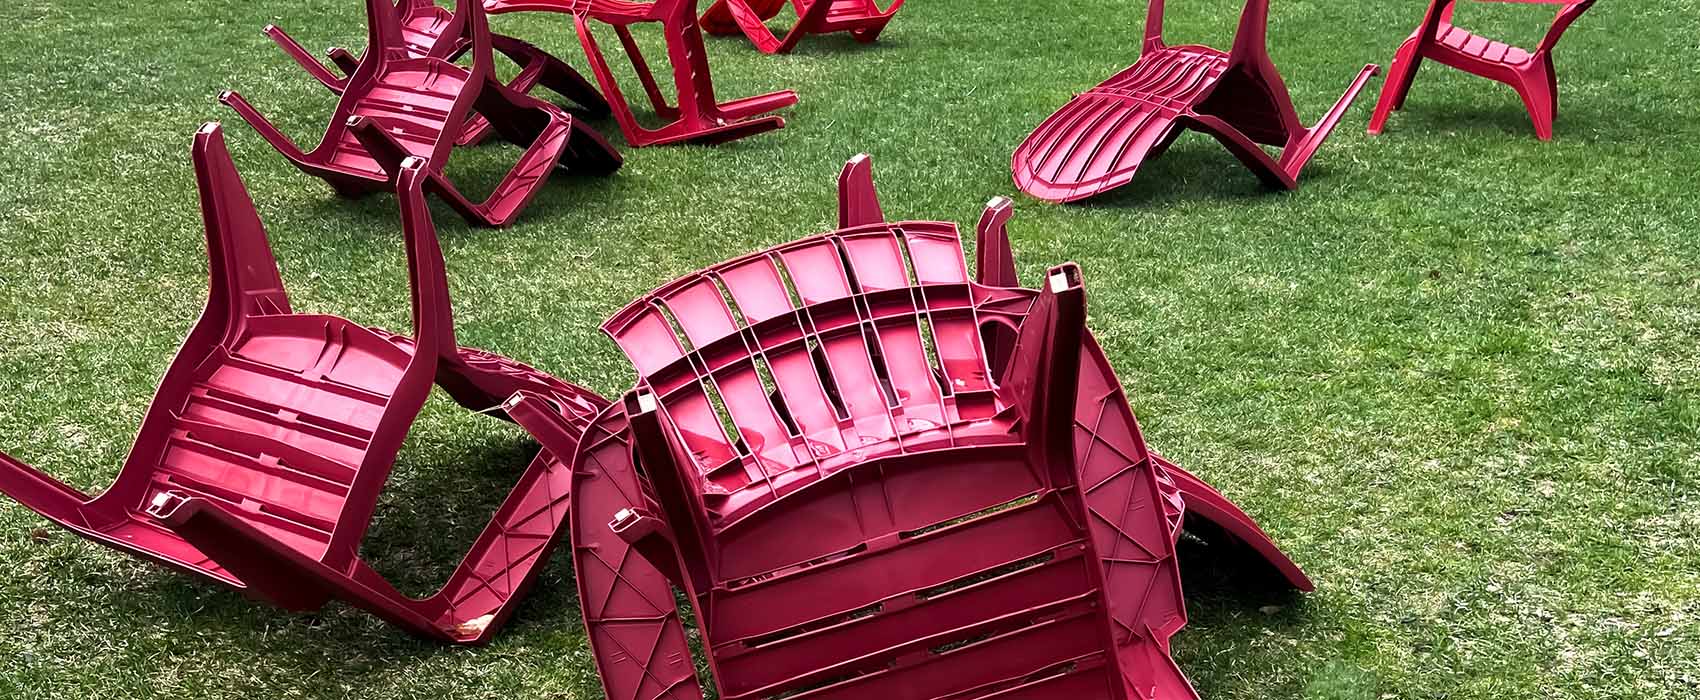 Red lawn chairs overturned on green lawn